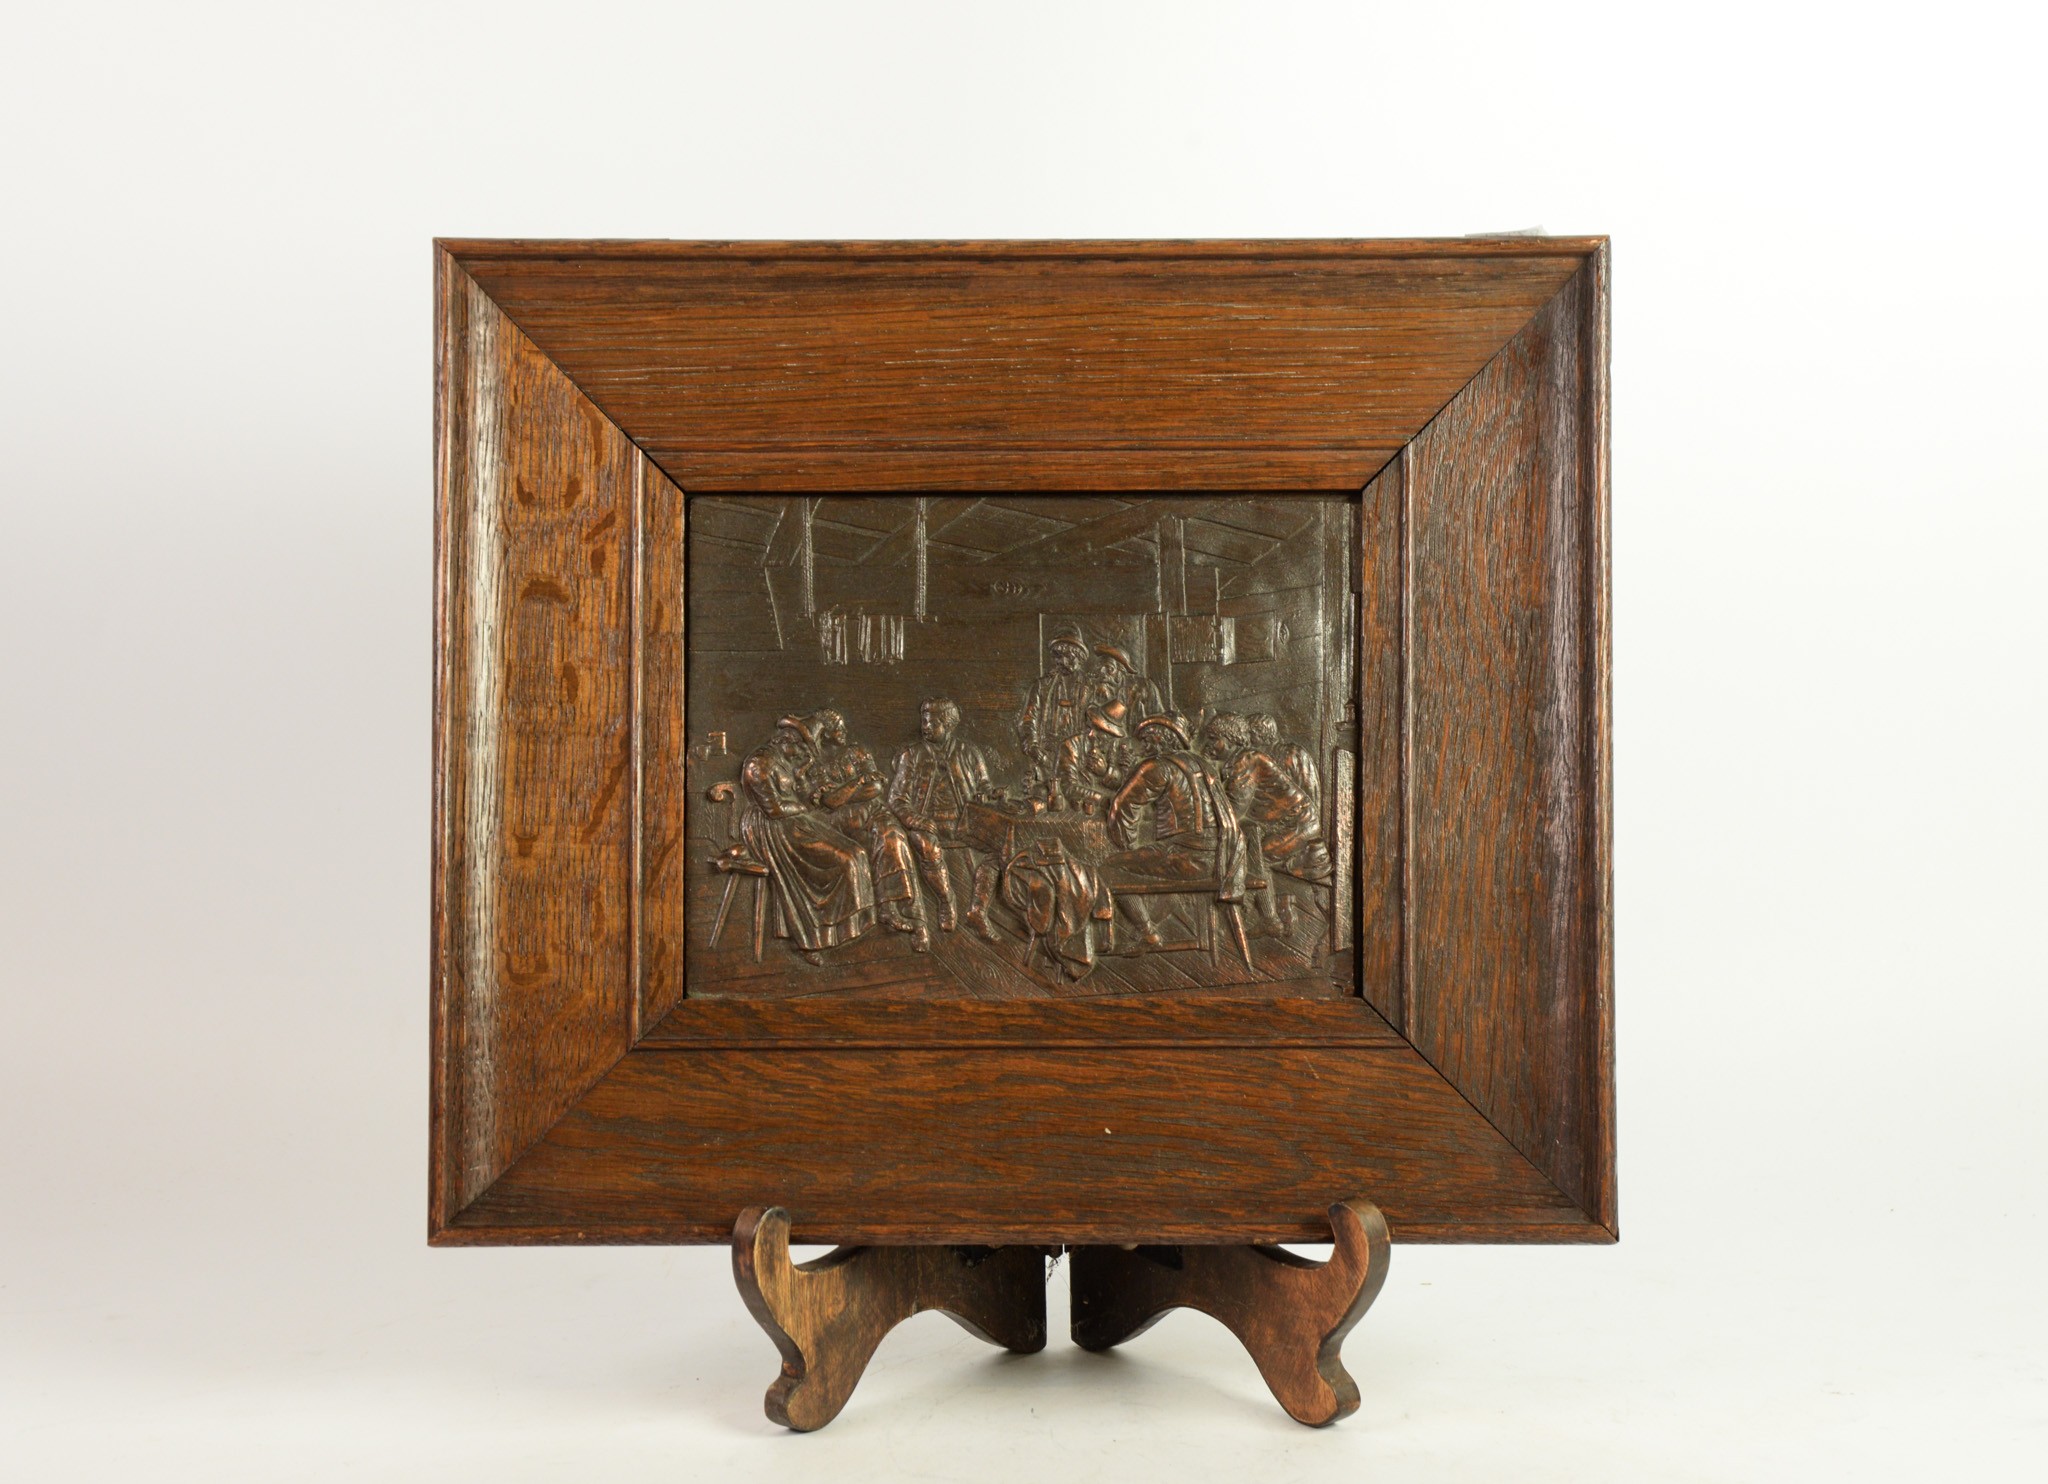 EARLY TWENTIETH CENTURY EMBOSSED COPPER PLAQUE, OF OBLONG FORM IN MOULDED OAK FRAME, depicting